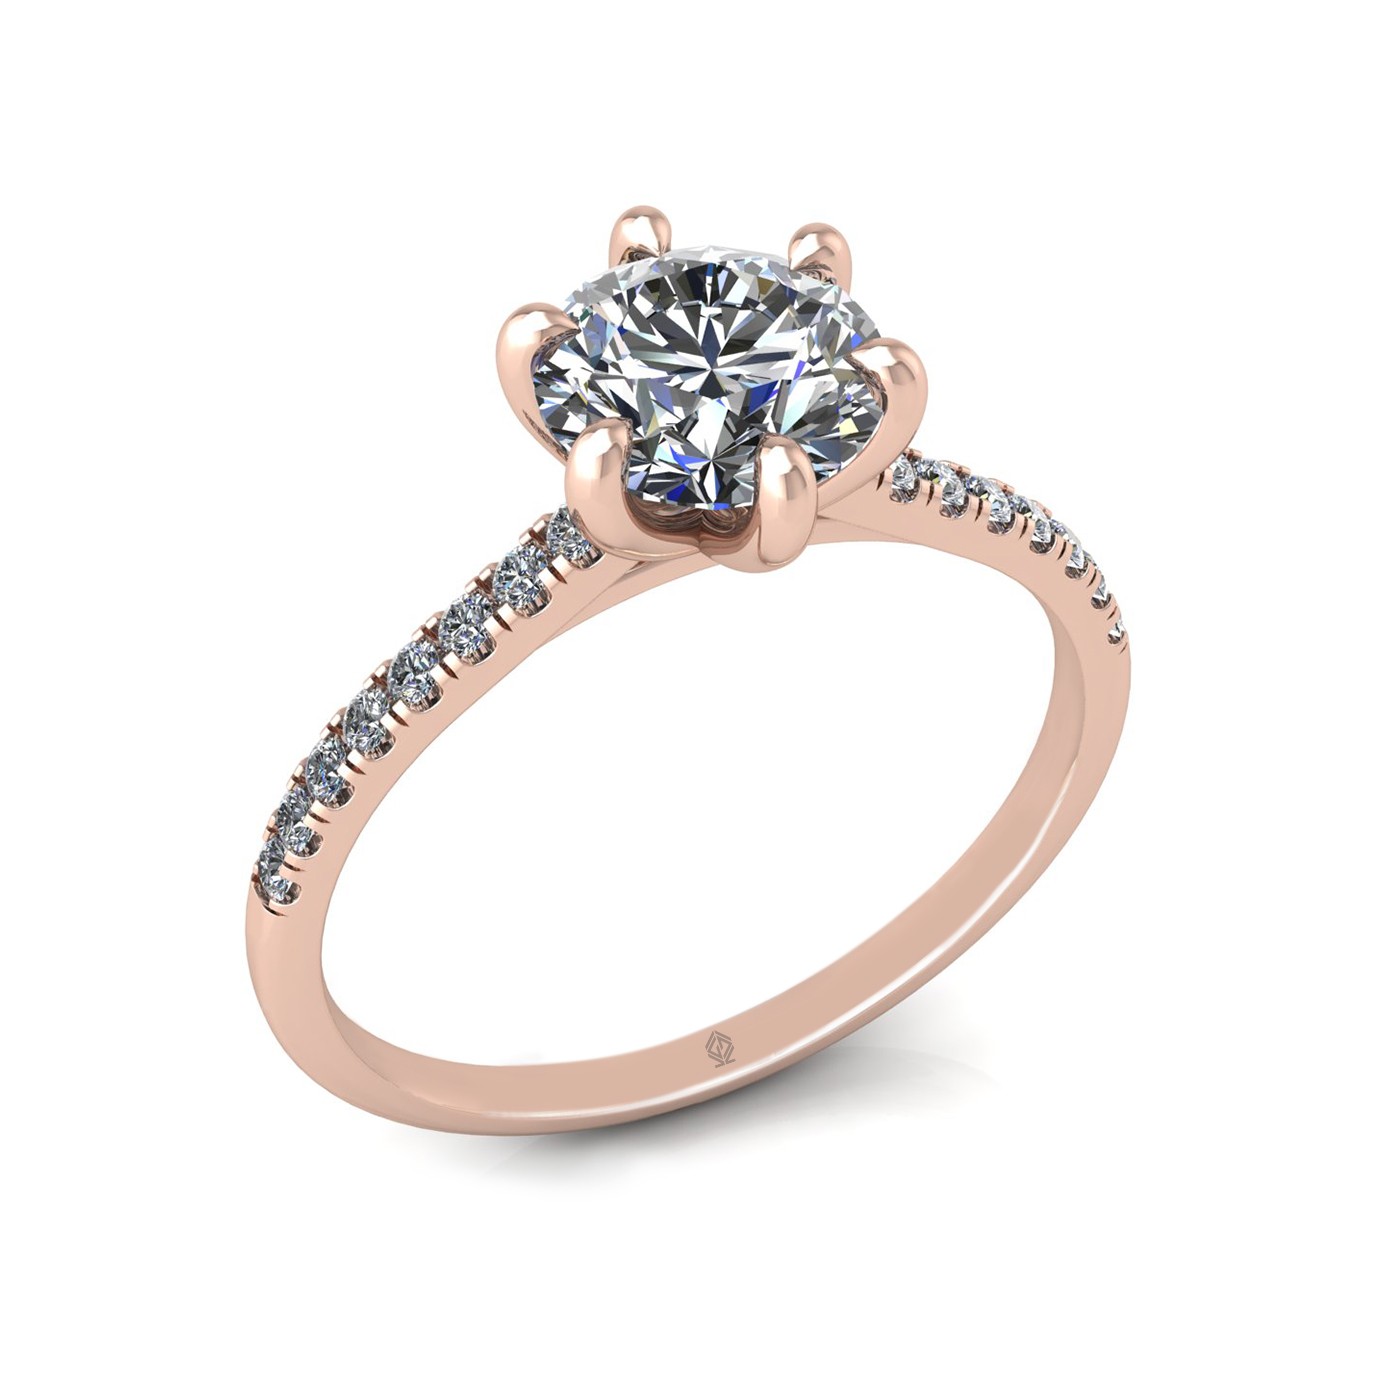 18k rose gold 1,00 ct 6 prongs round cut diamond engagement ring with whisper thin pavÉ set band